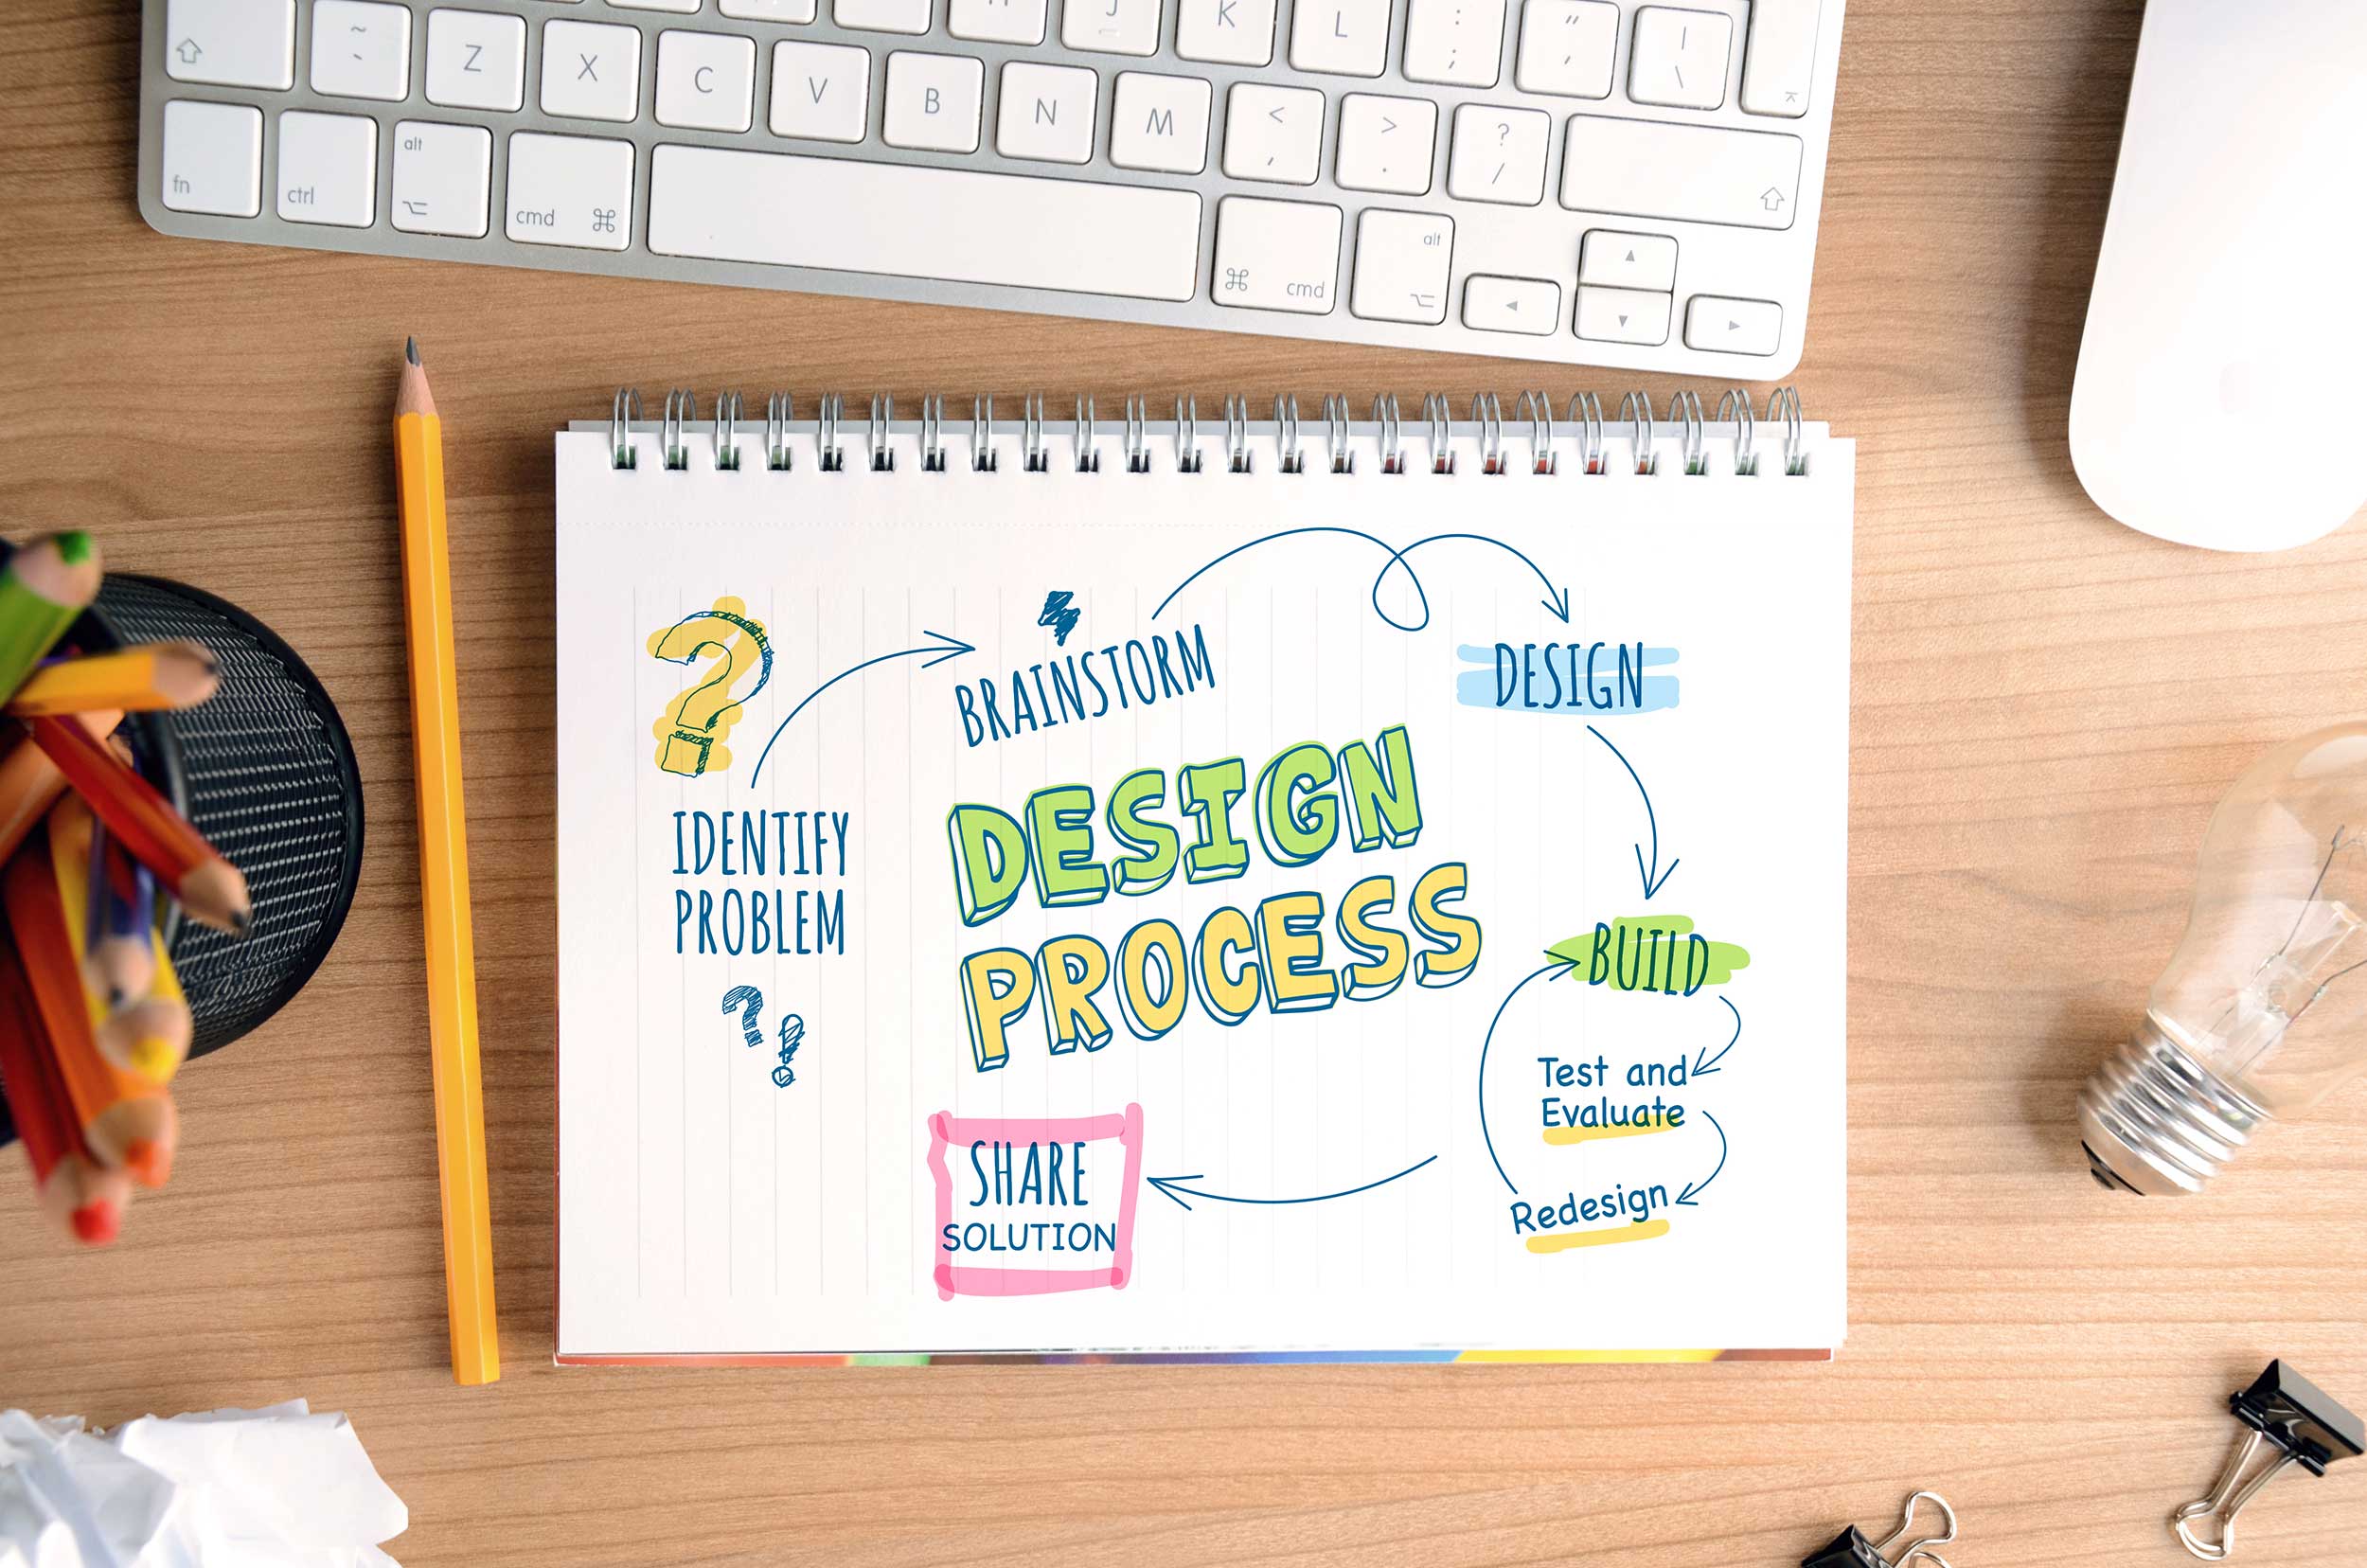 Featured image for “Why Choosing the Right Website Designer Can Make or Break Your Small Business”